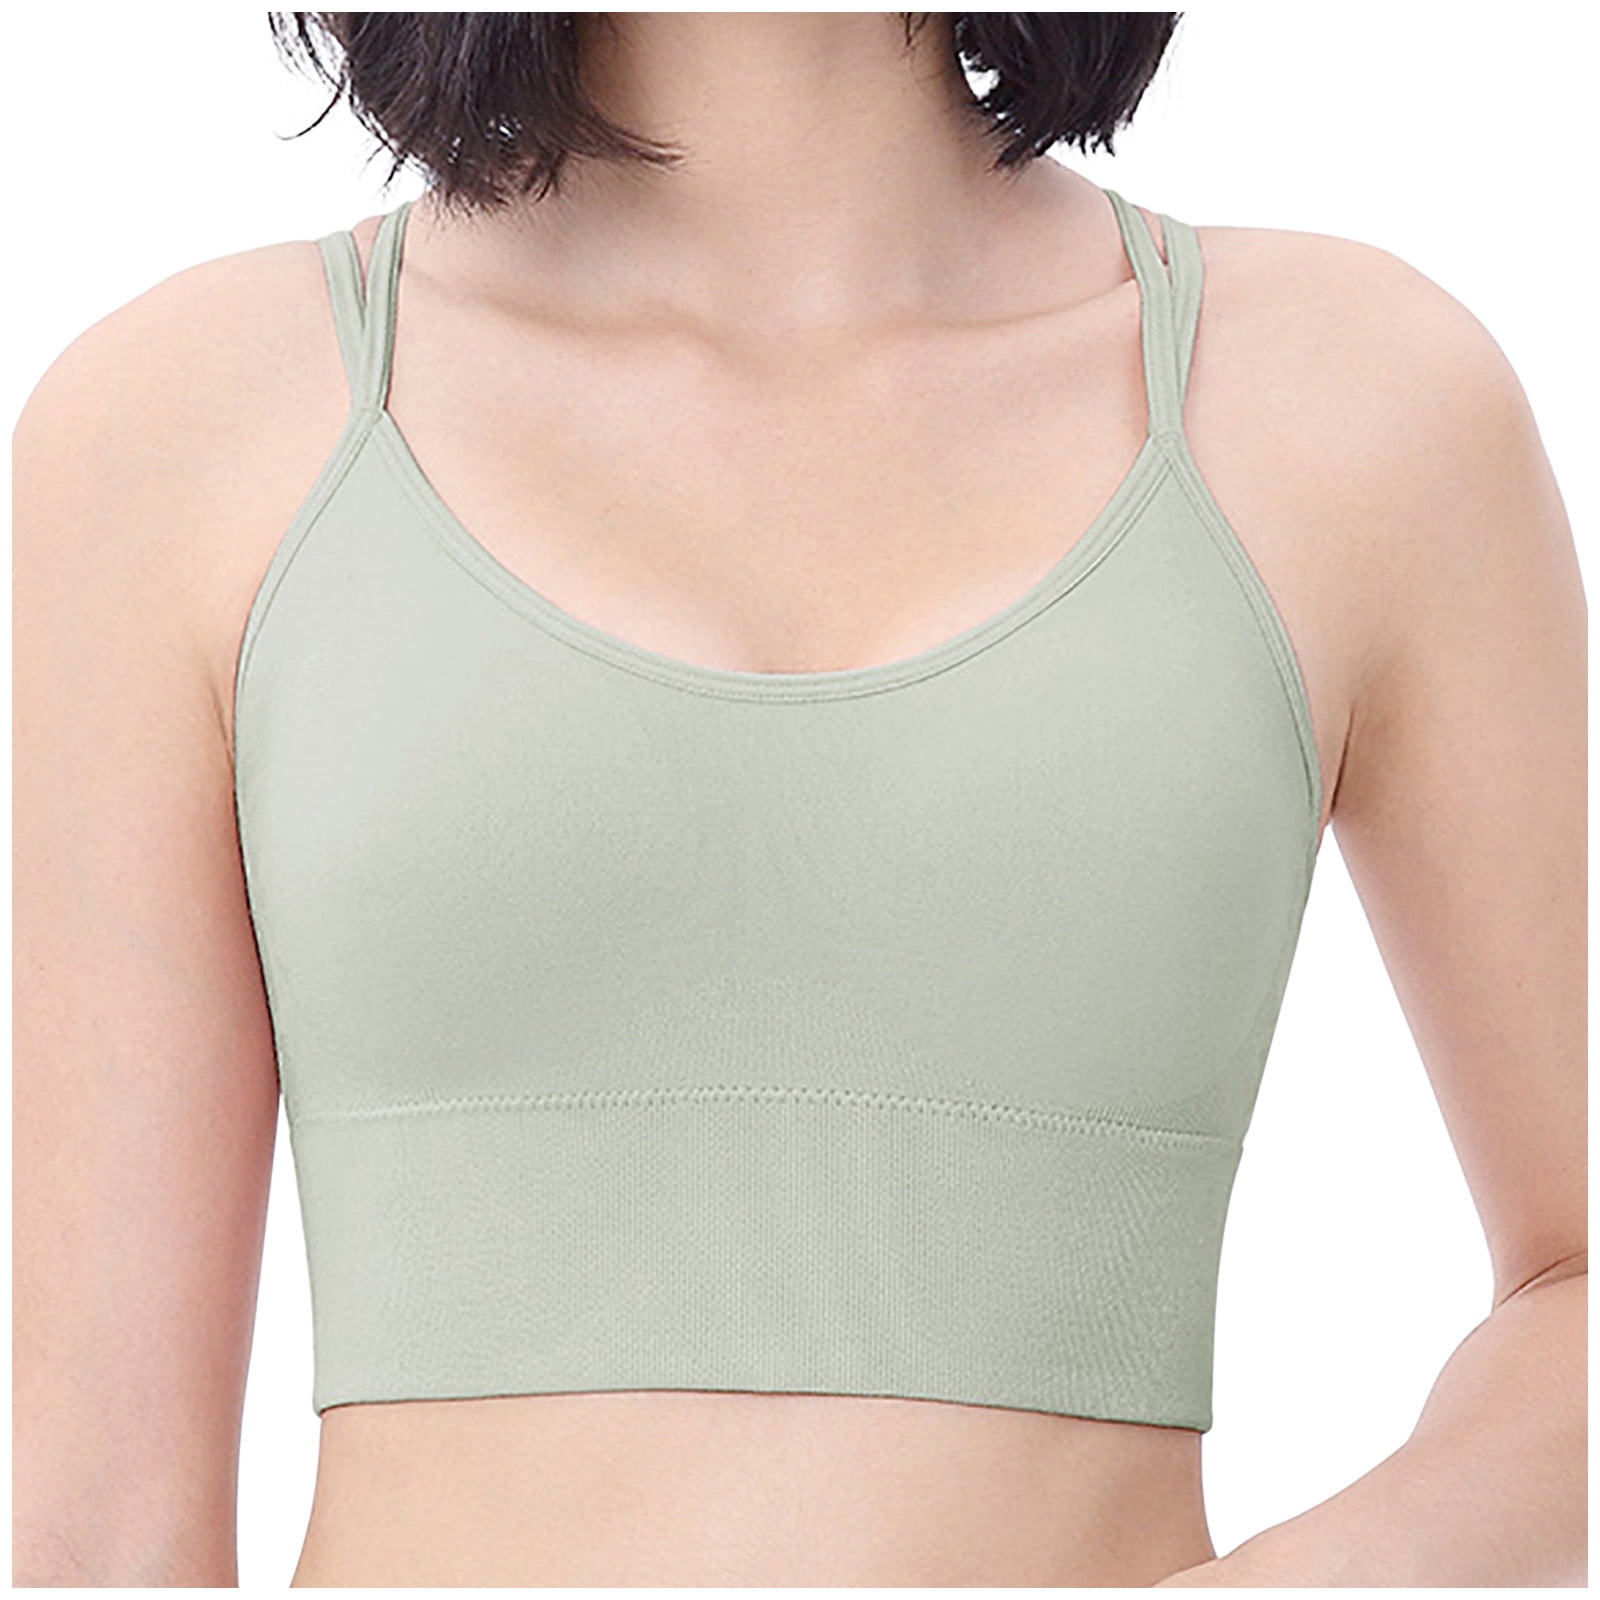 Strappy Yoga Sports Bras For Women Padded Criss-cross Back Tank Tops A-d